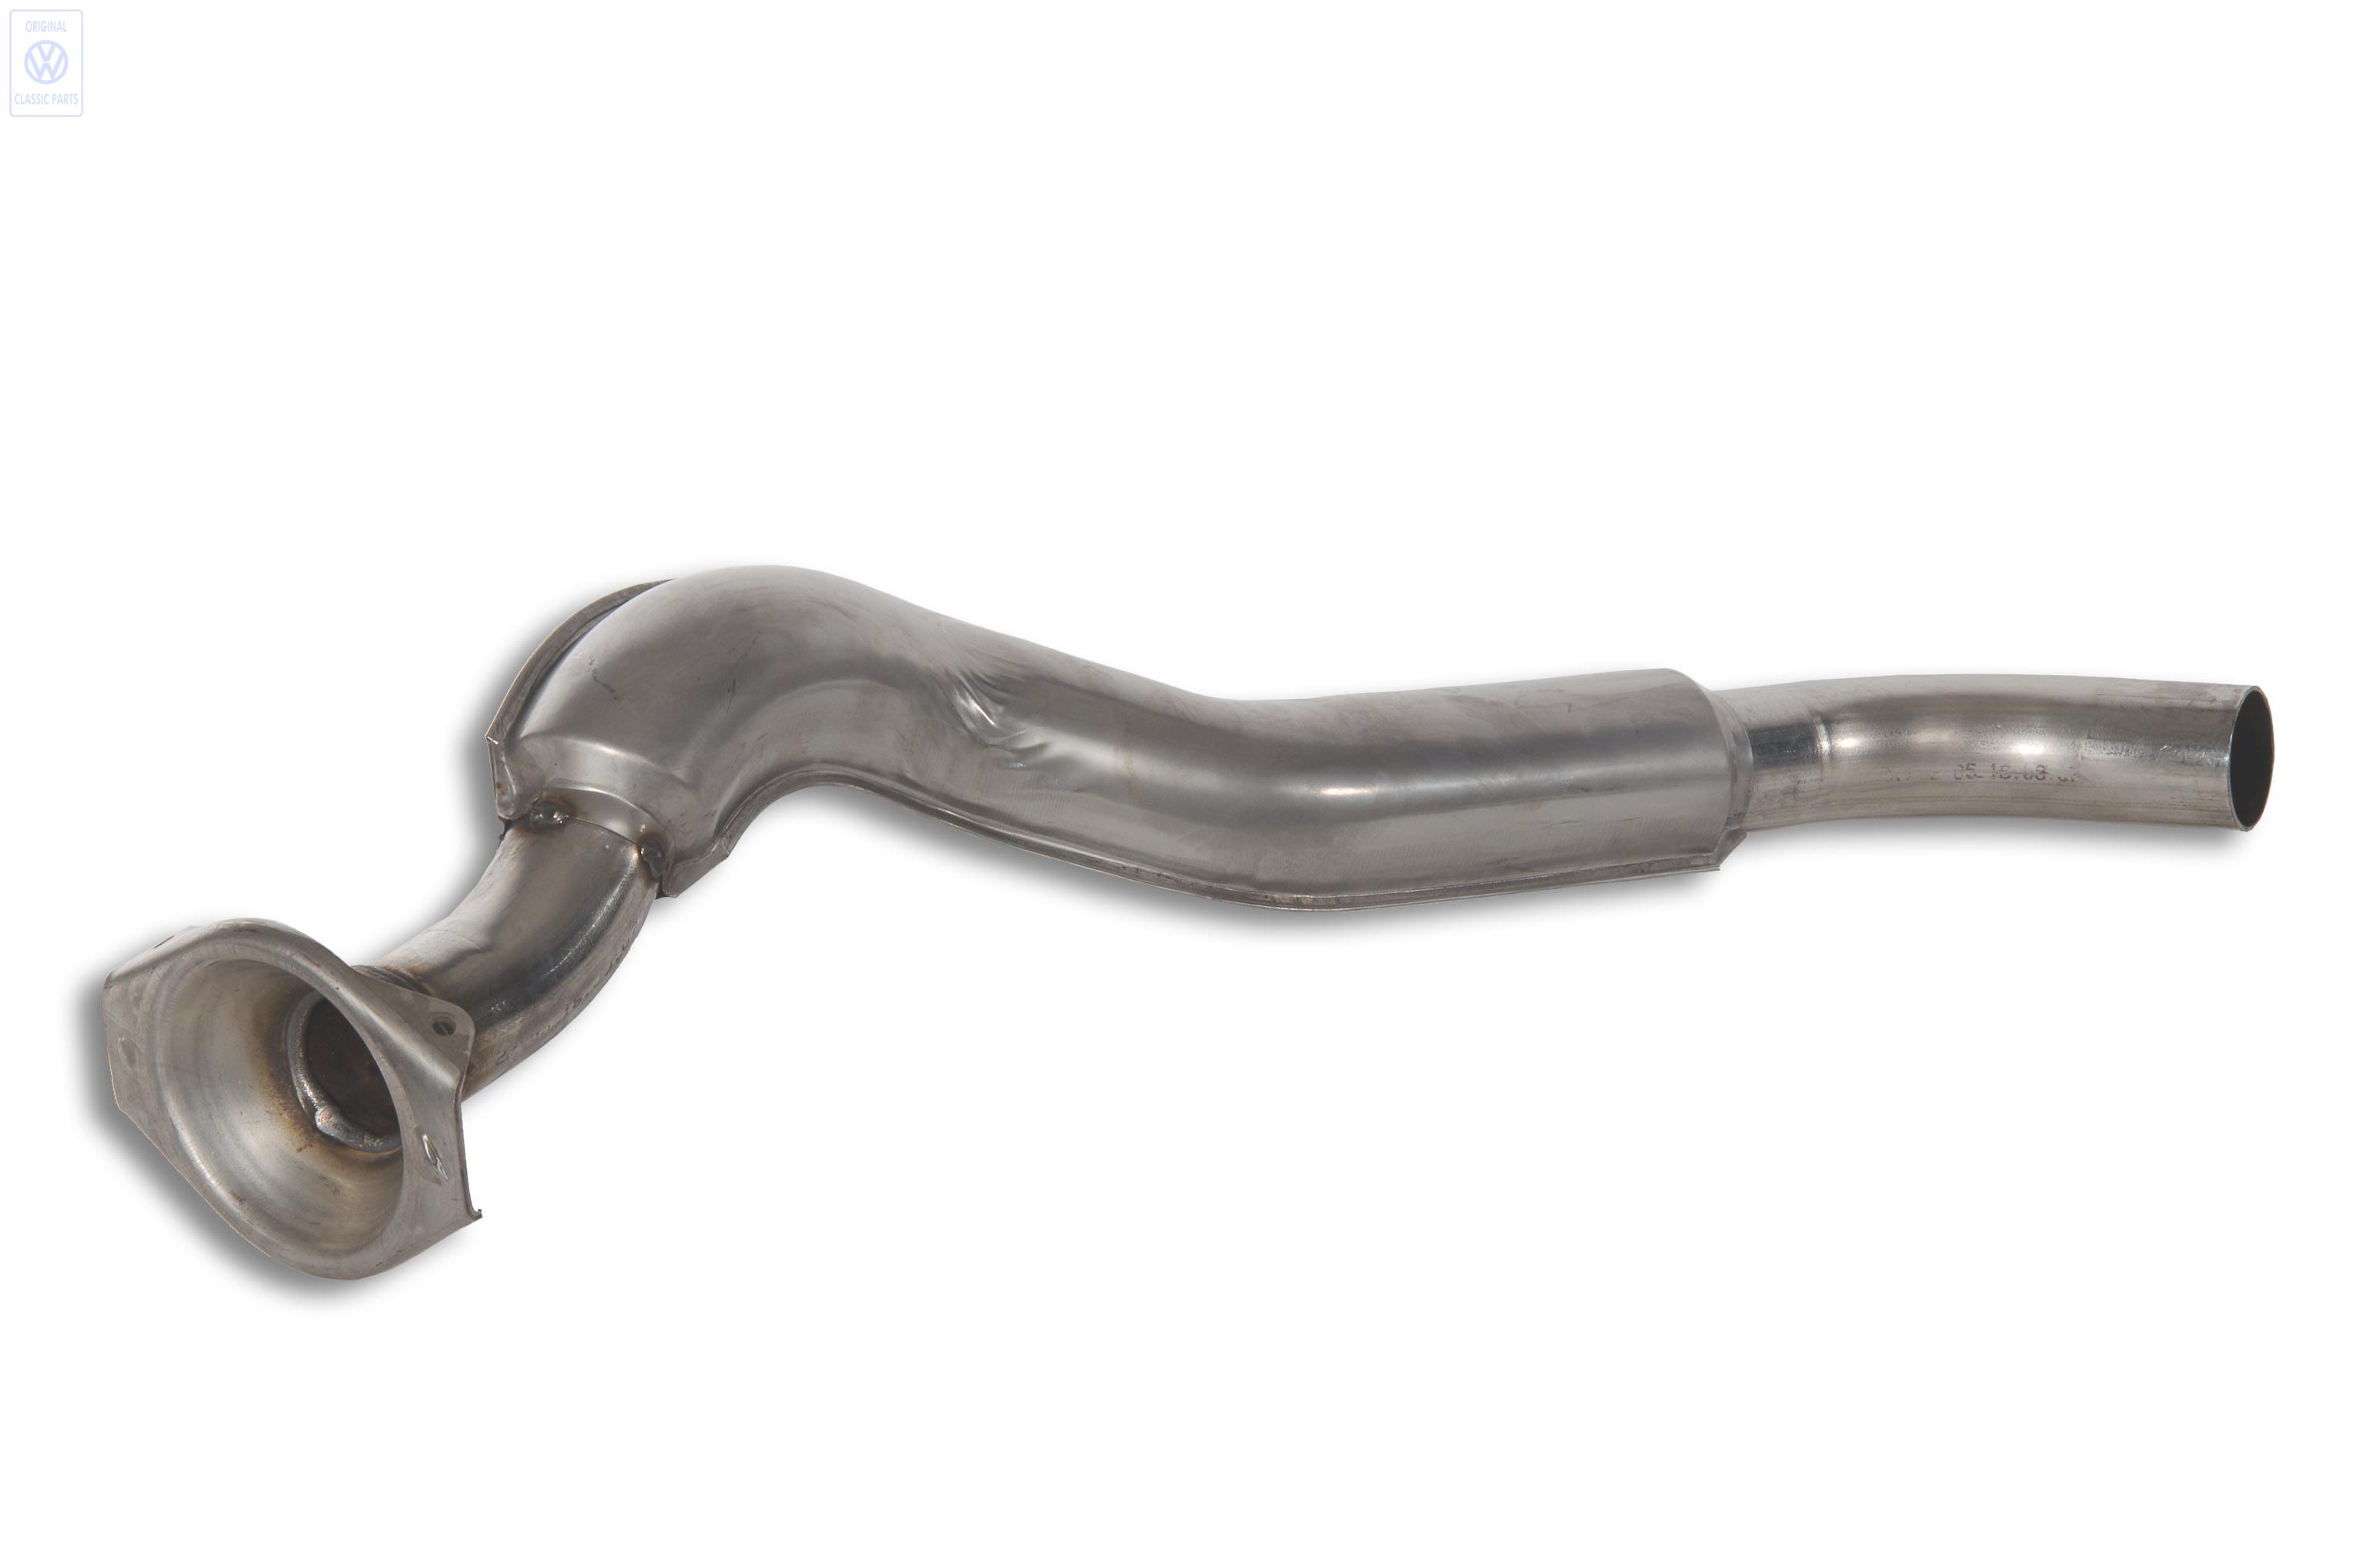 Exhaust pipe for VW T4